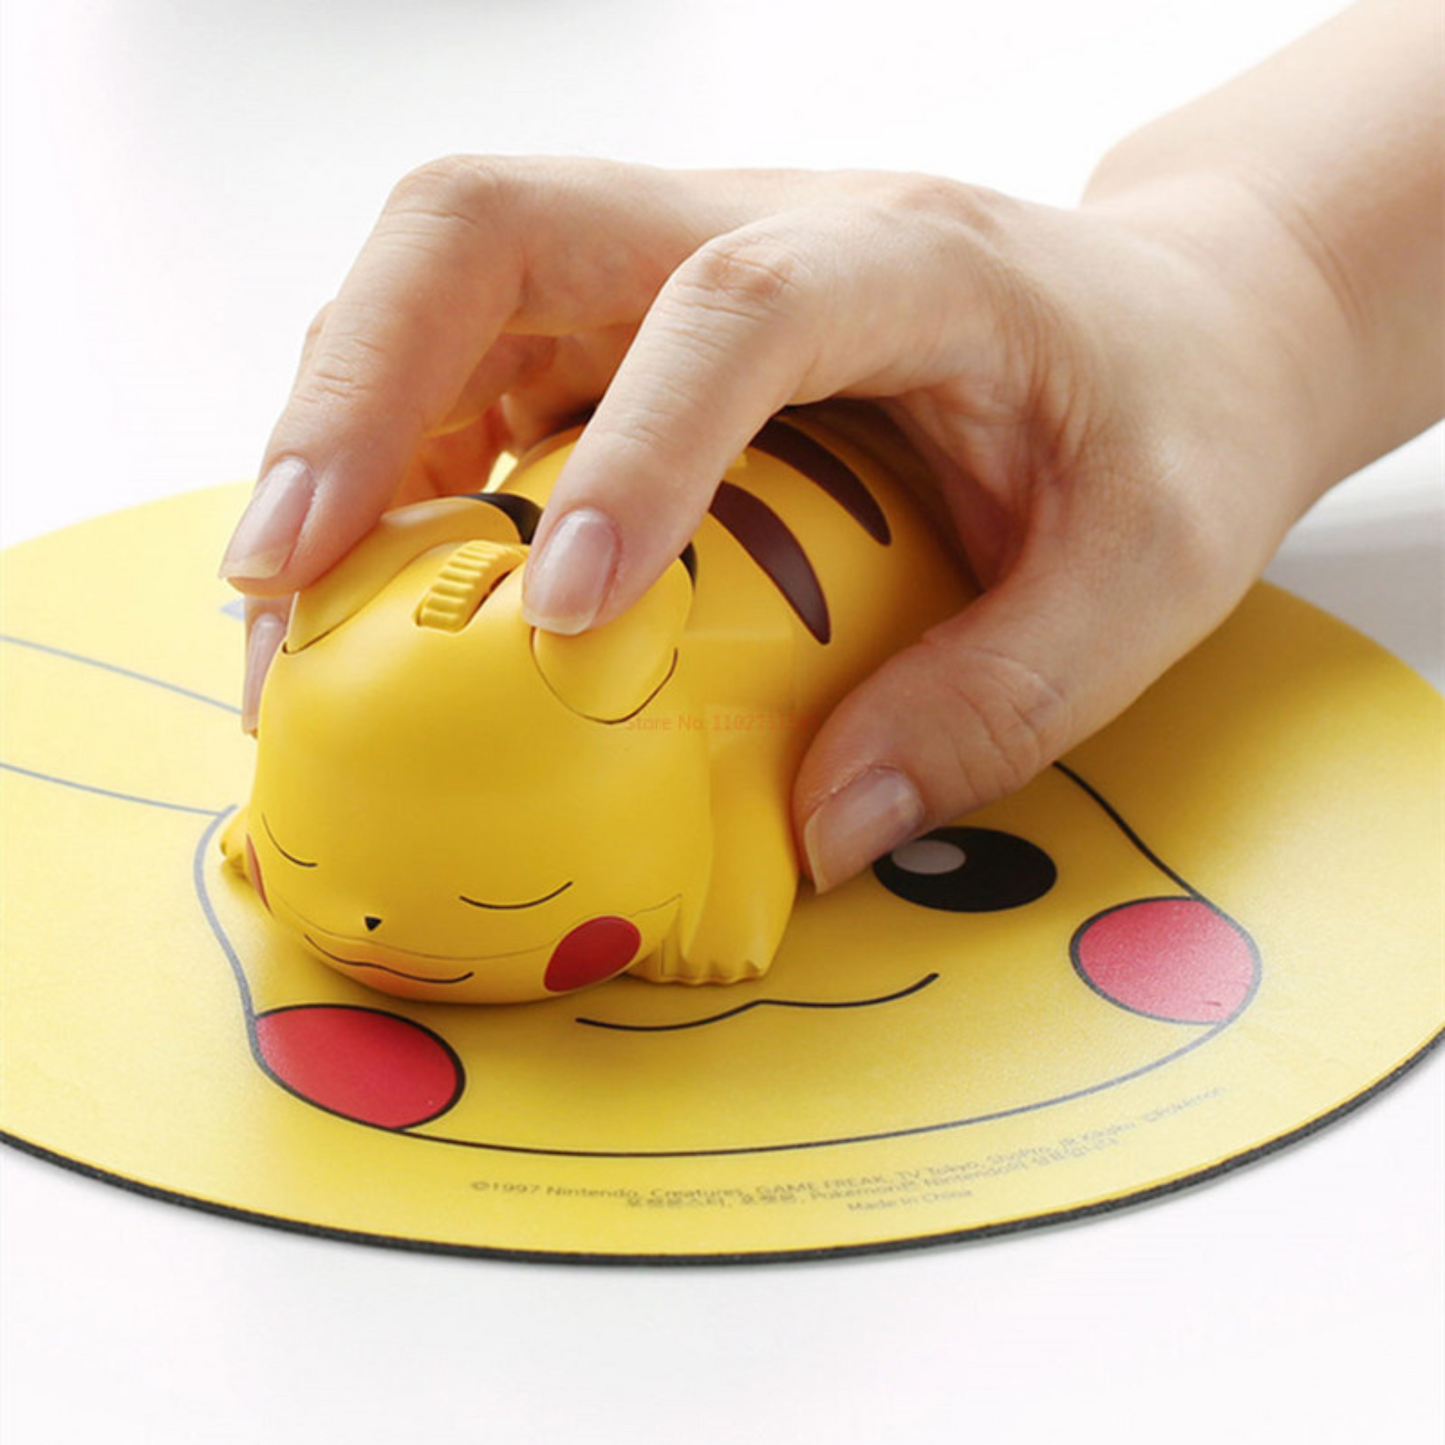 Main image - Pikachu Pokémon mouse wireless bluetooth connection with official premium nintendo quality, perfect gift for pokemon fans